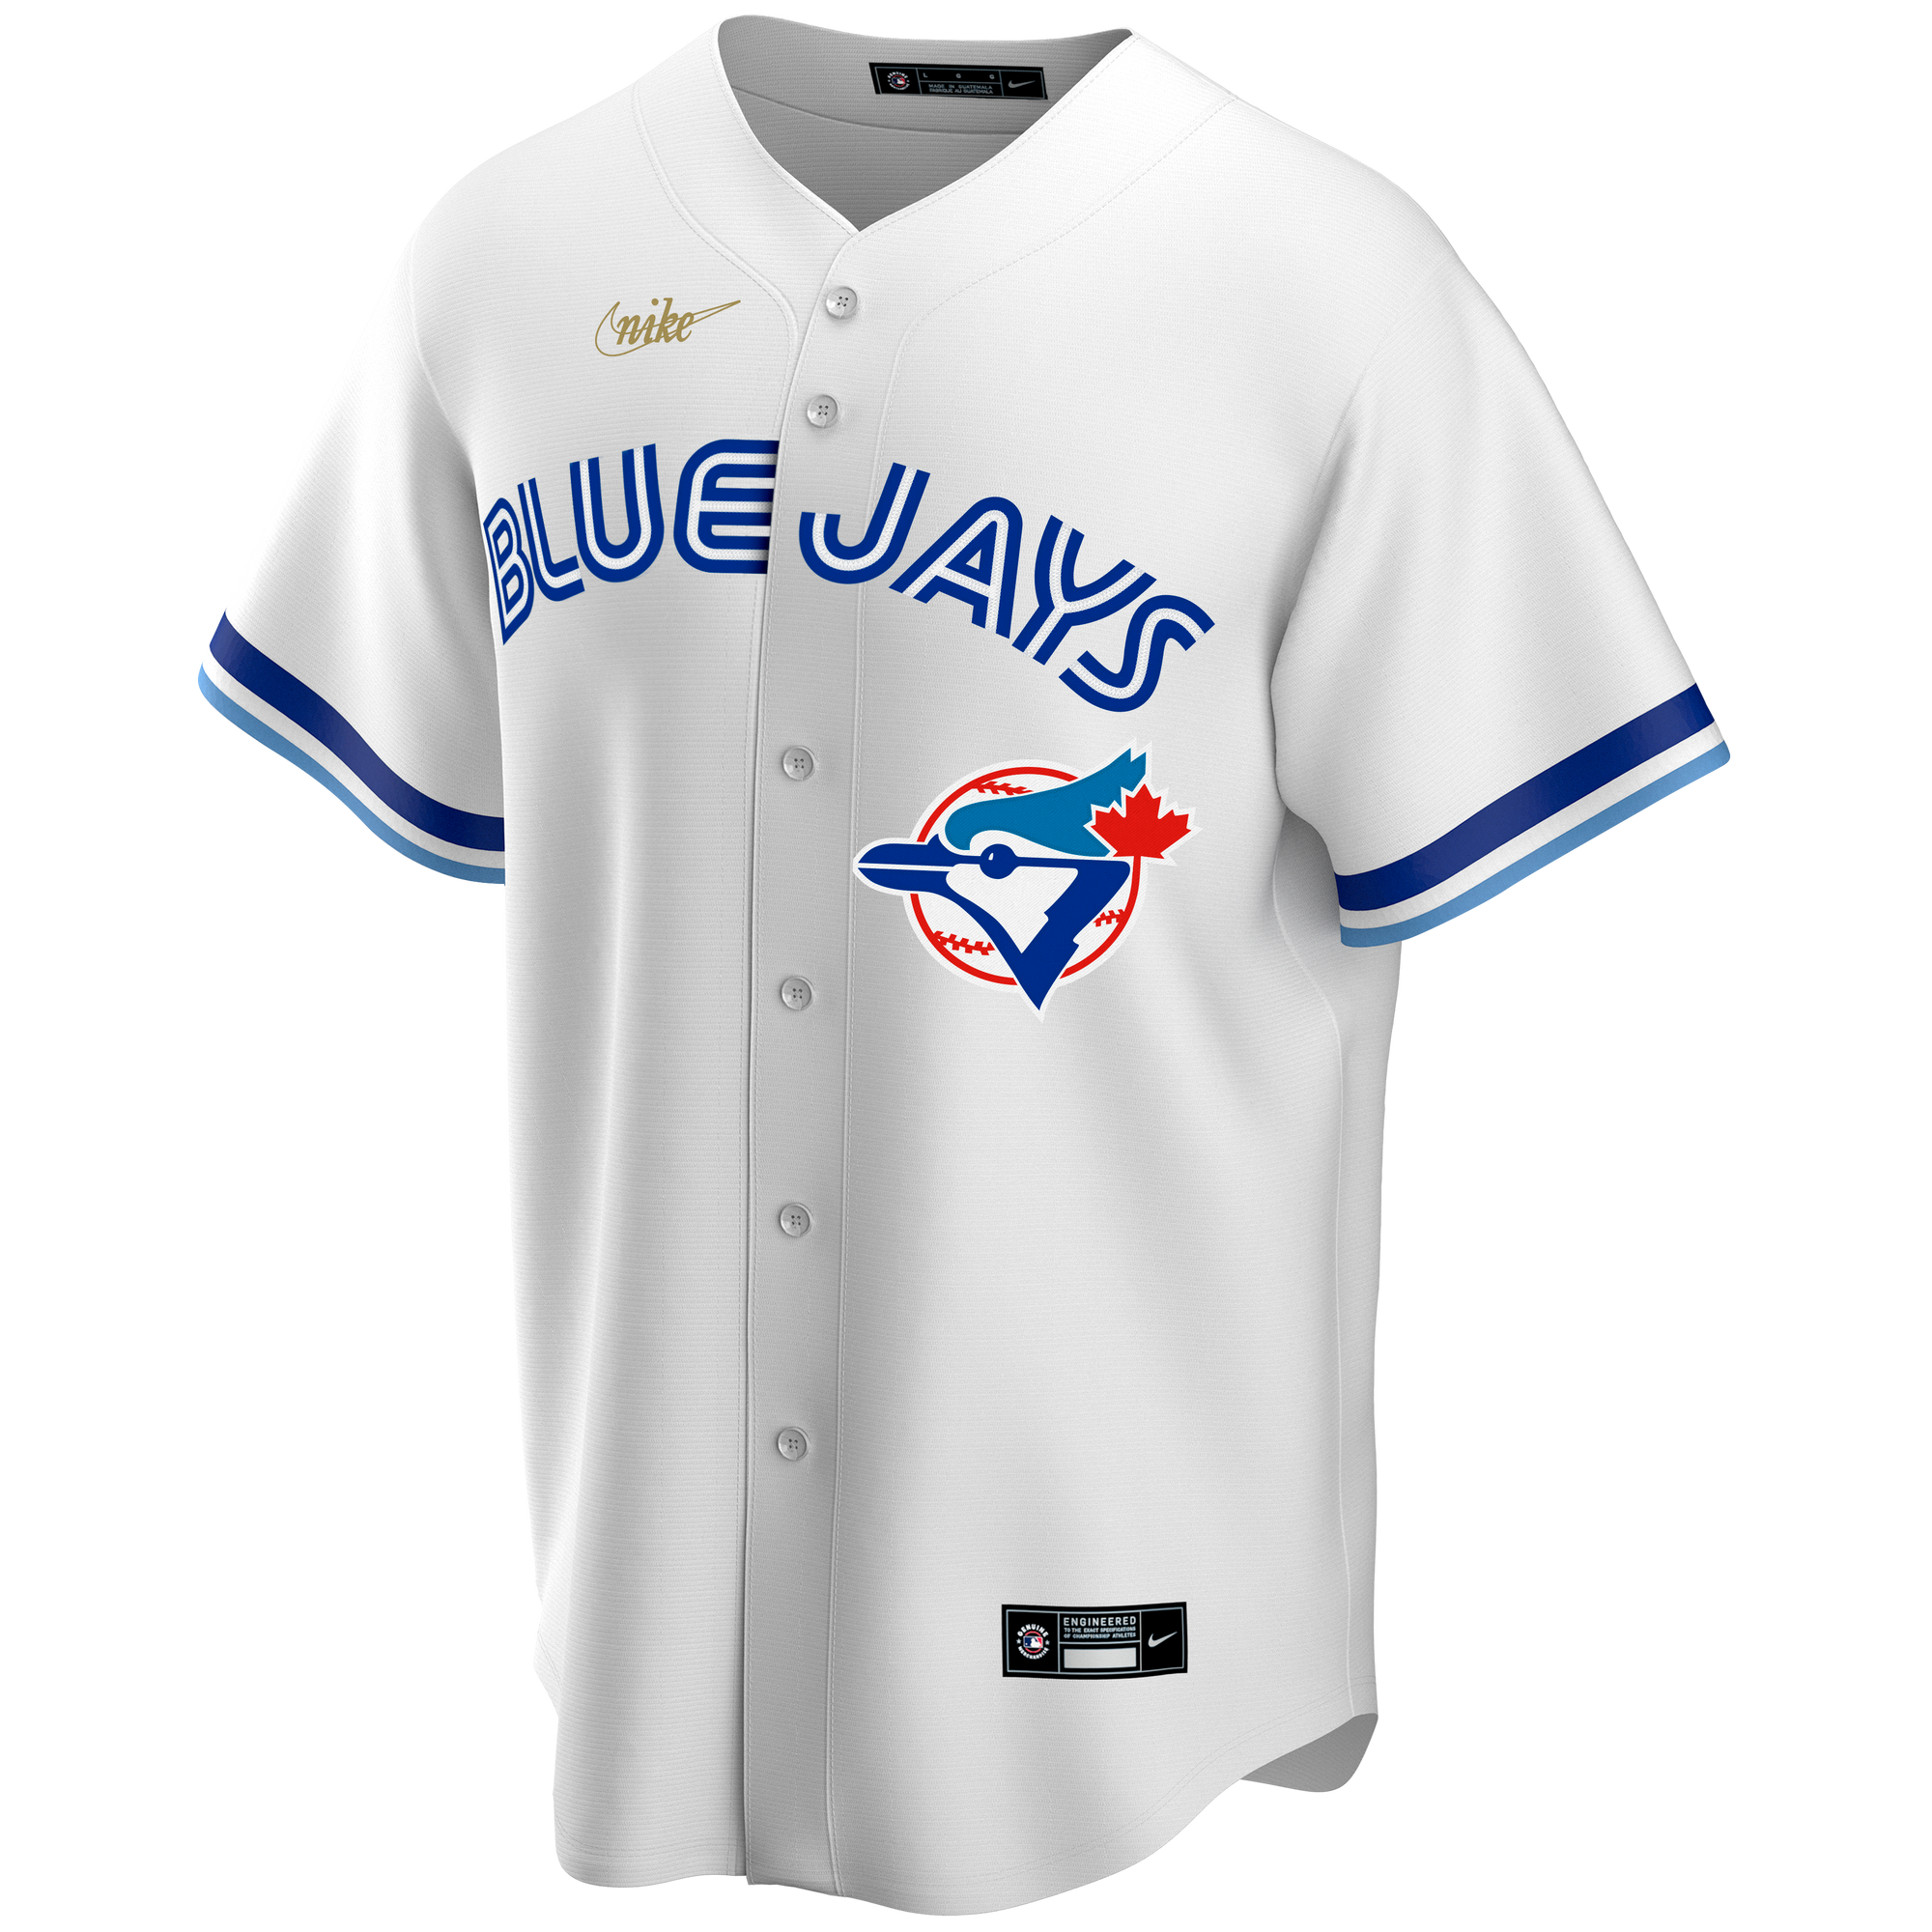 Mitchell & Ness Joe Carter Toronto Blue Jays 1993 Authentic Cooperstown Collection Mesh Batting Practice Jersey - Royal